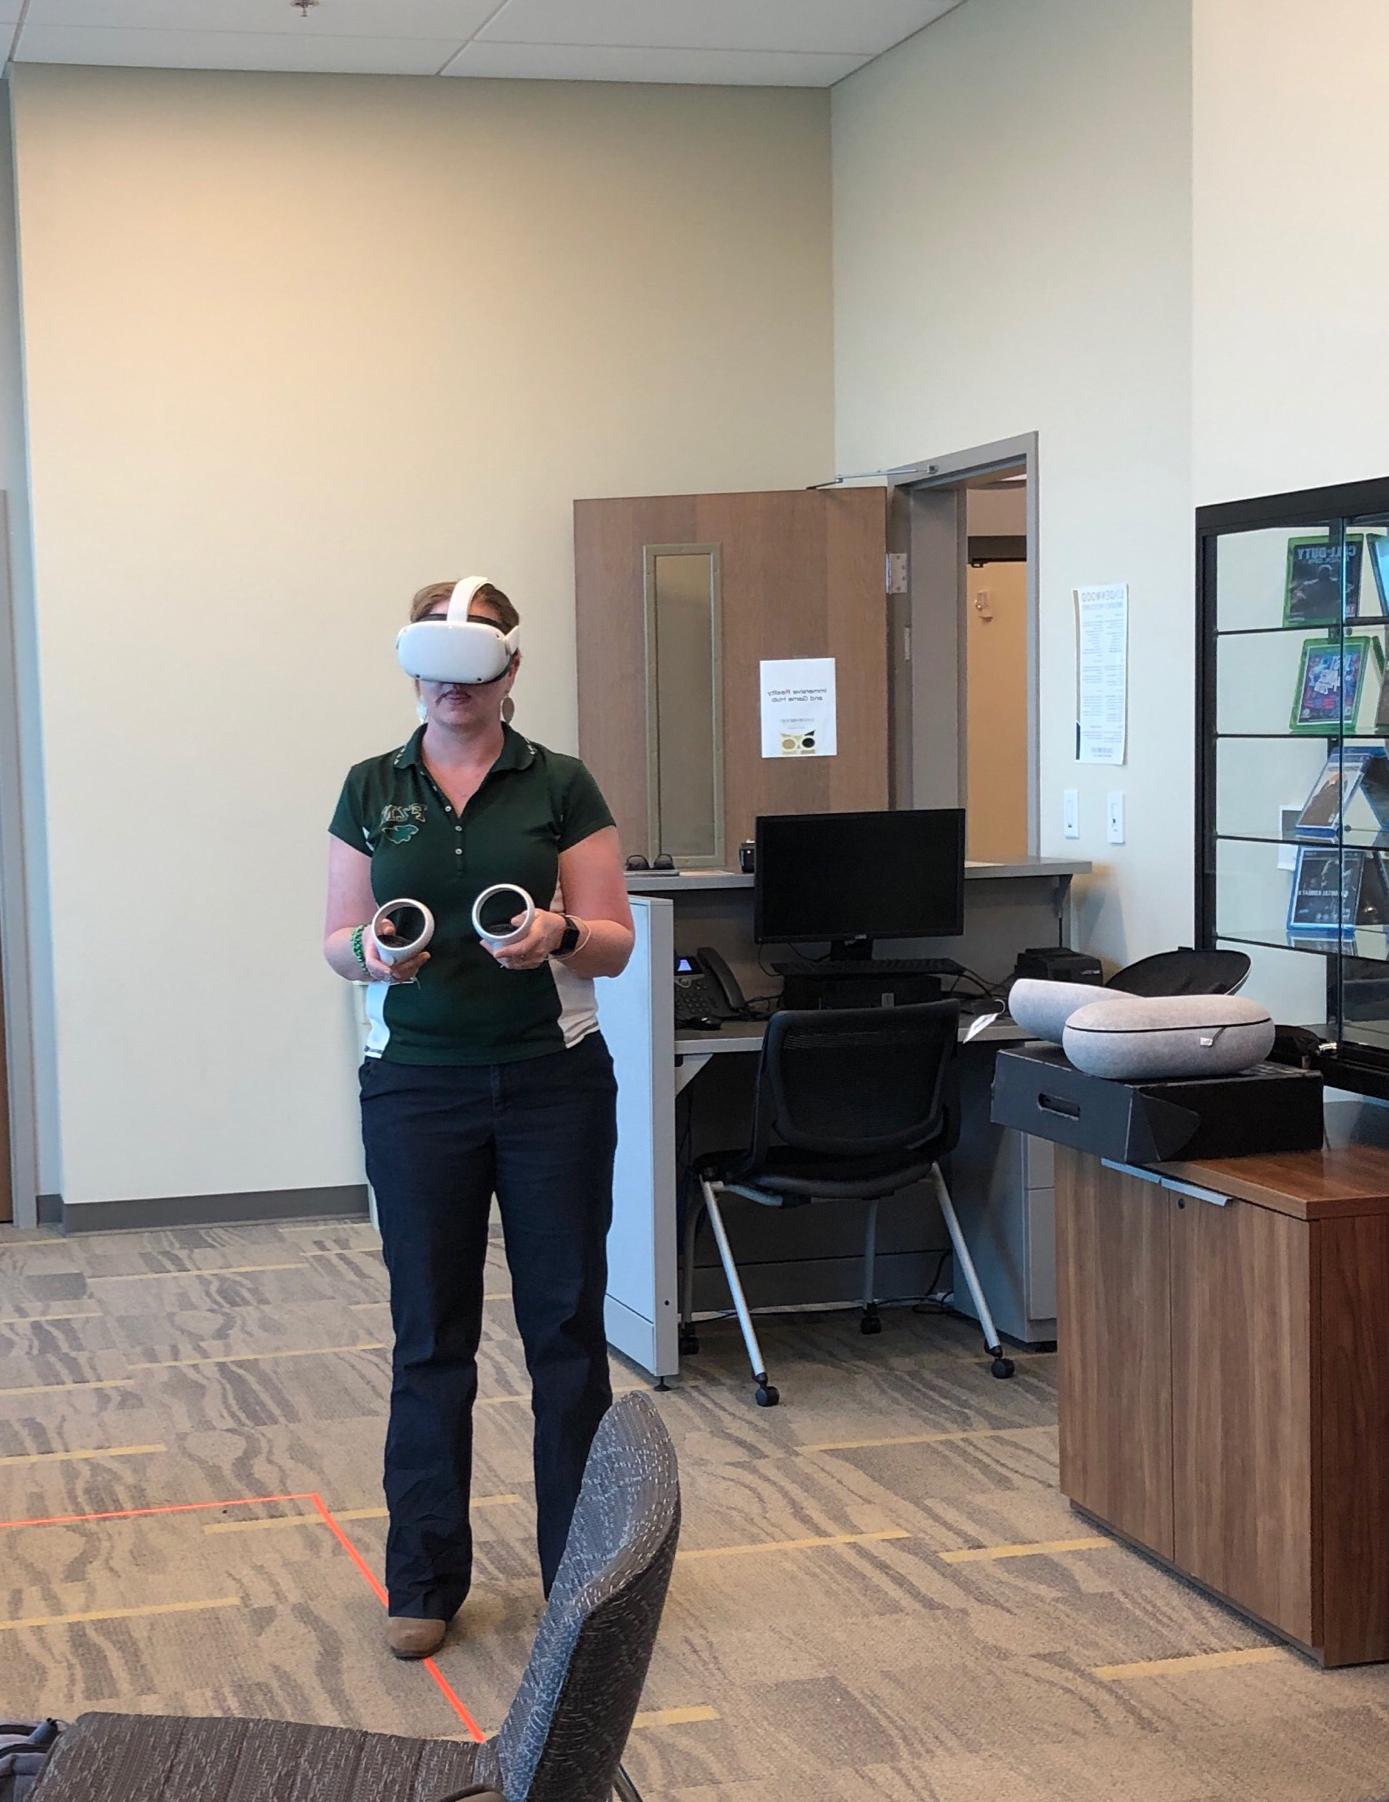 Oculus Quest headset user in the Immersive Reality and Game Lab